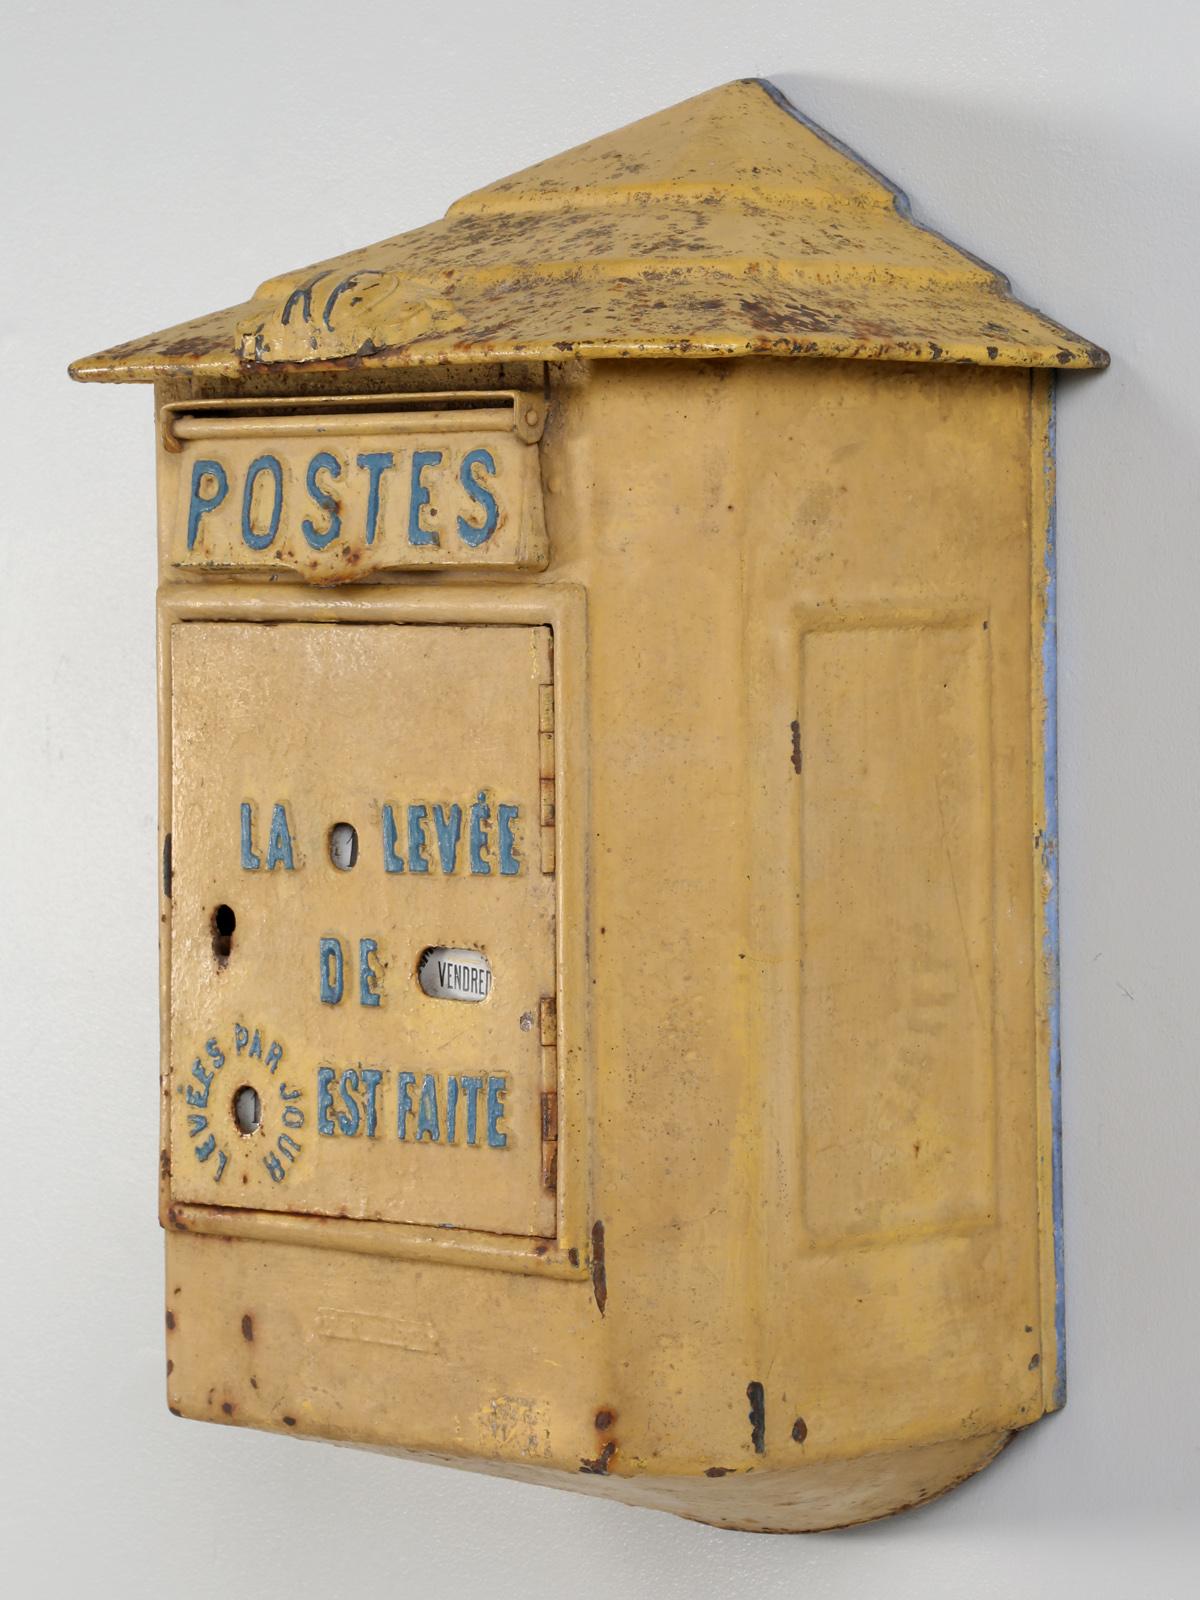 Antique French Delachana Paris mailbox and in order to encourage small towns to install additional mail boxes, Delachanal created for the post office a large steel box utilizing the same door as the cast iron boxes. The new mail box had a pressed